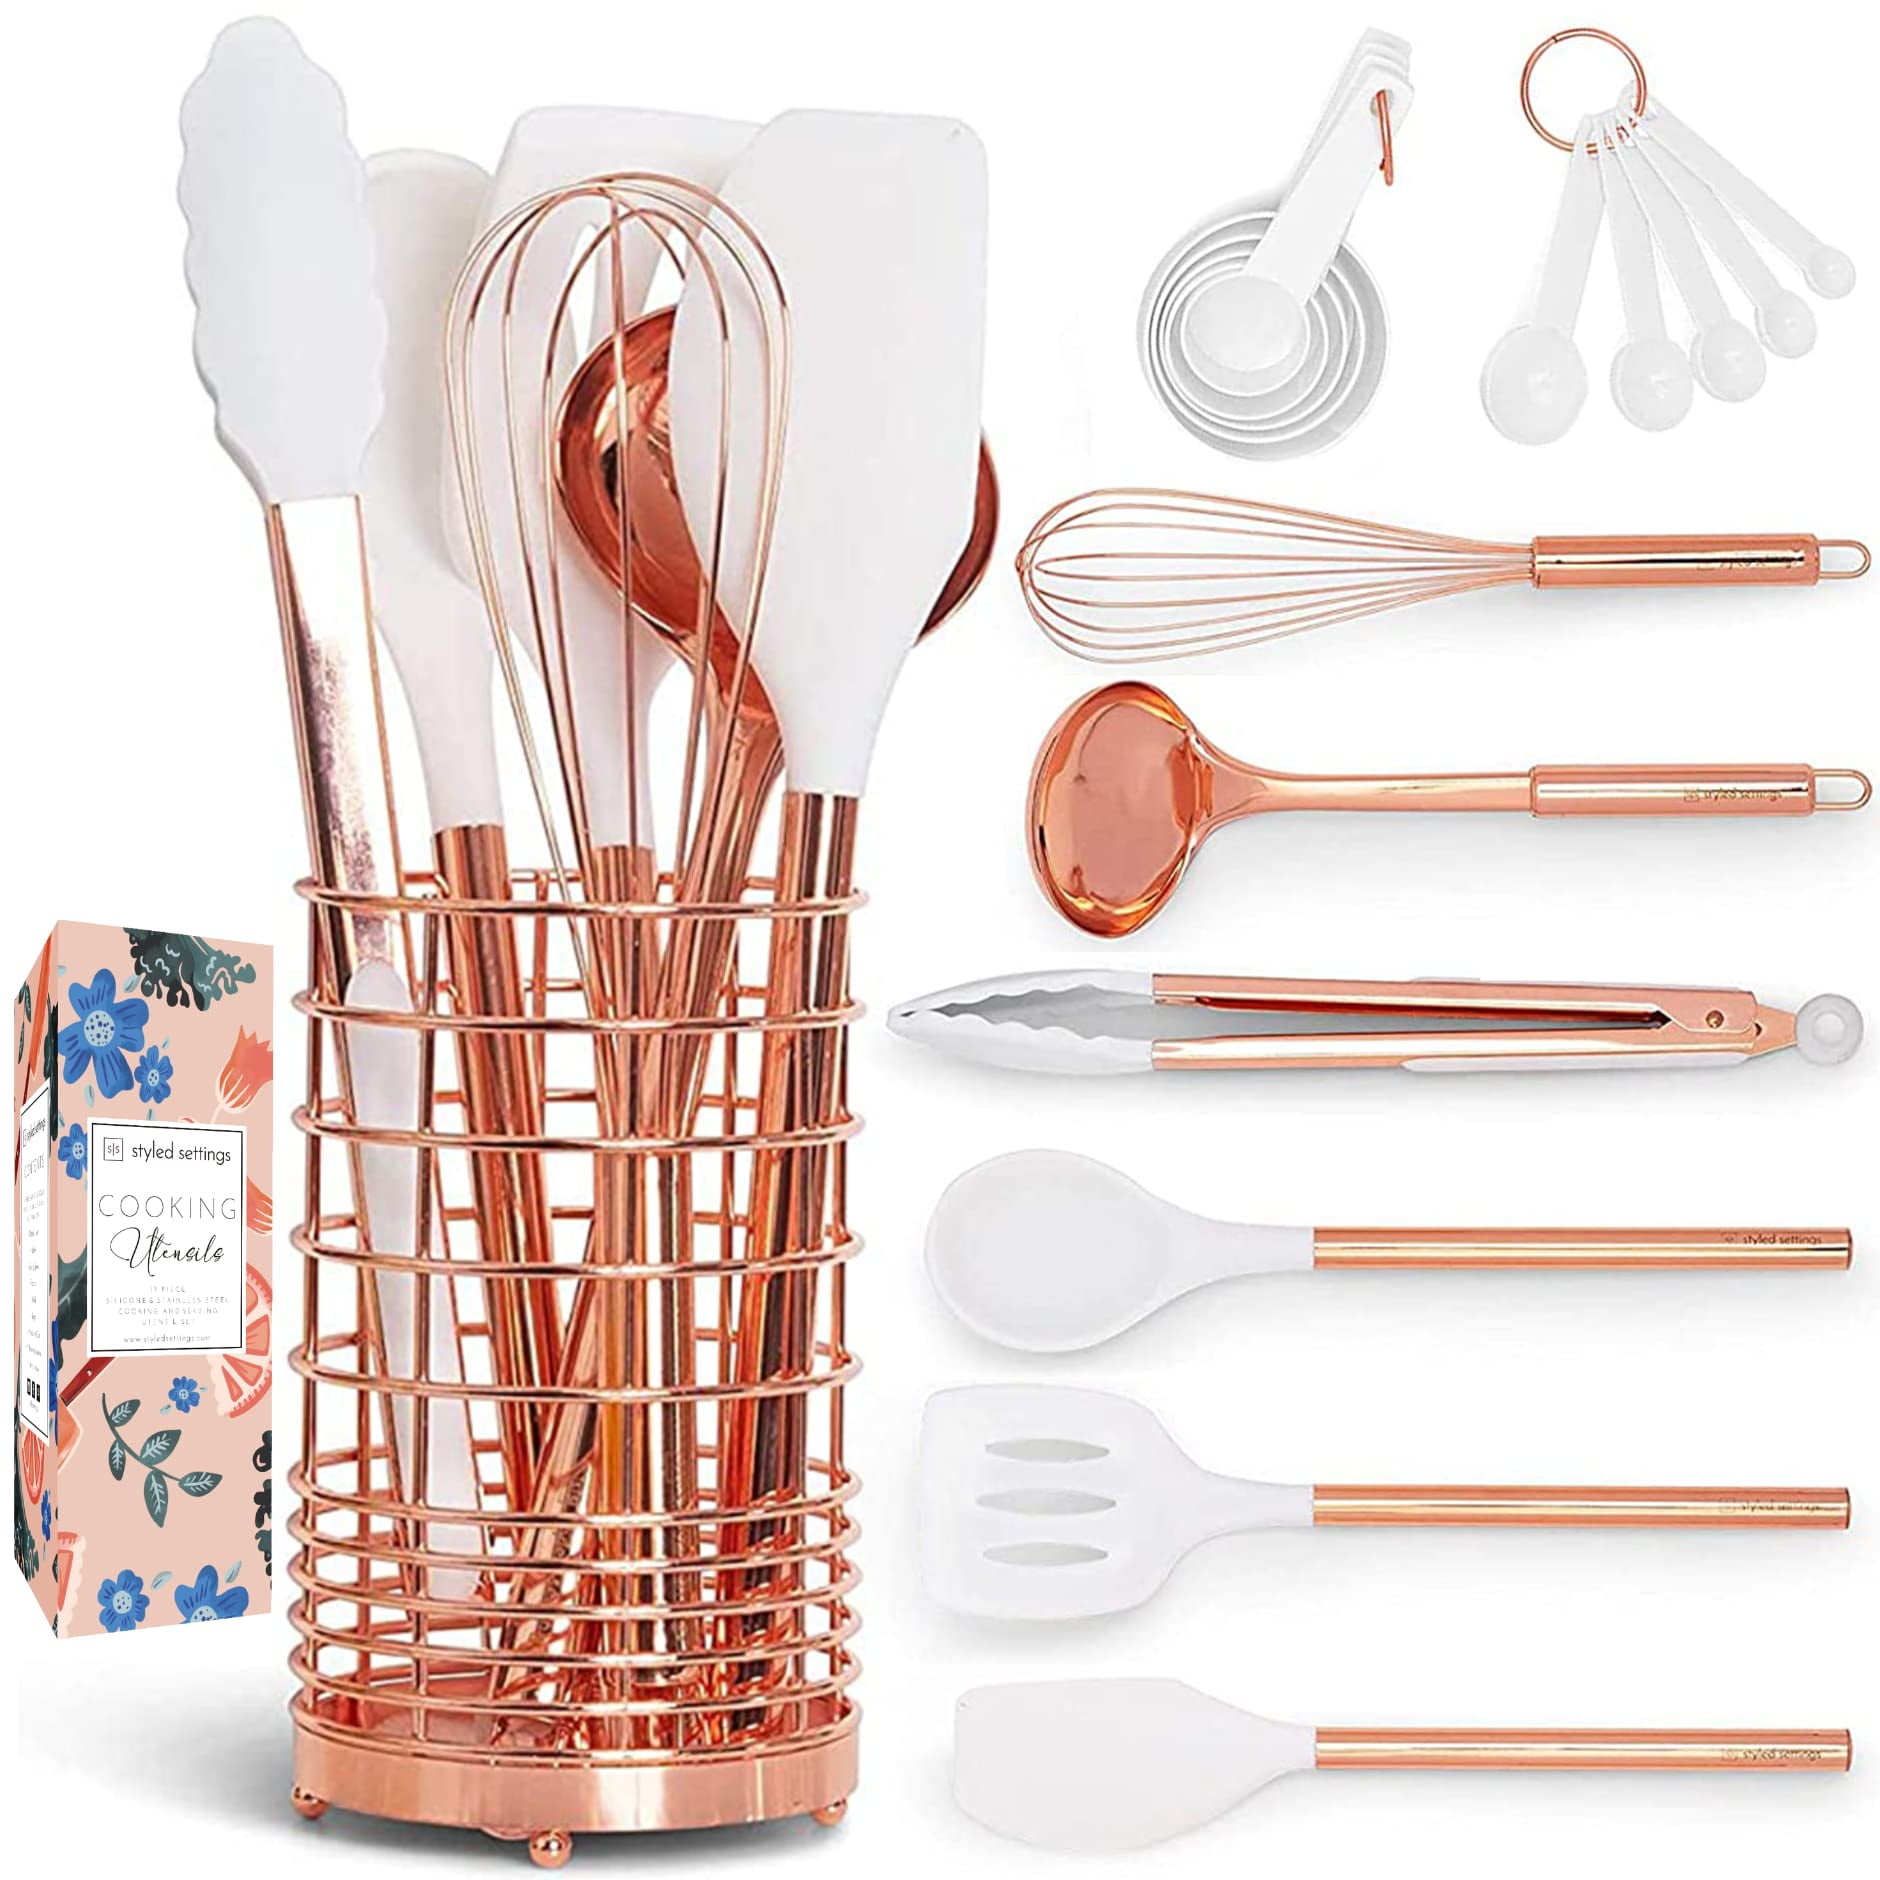 Styled Settings White Silicone & Copper Kitchen Utensils Set with Holder -  17 PC Rose Gold Kitchen Utensils Set includes White & Copper Measuring Cups  and Spoons & Copper Utensil Holder - Walmart.com